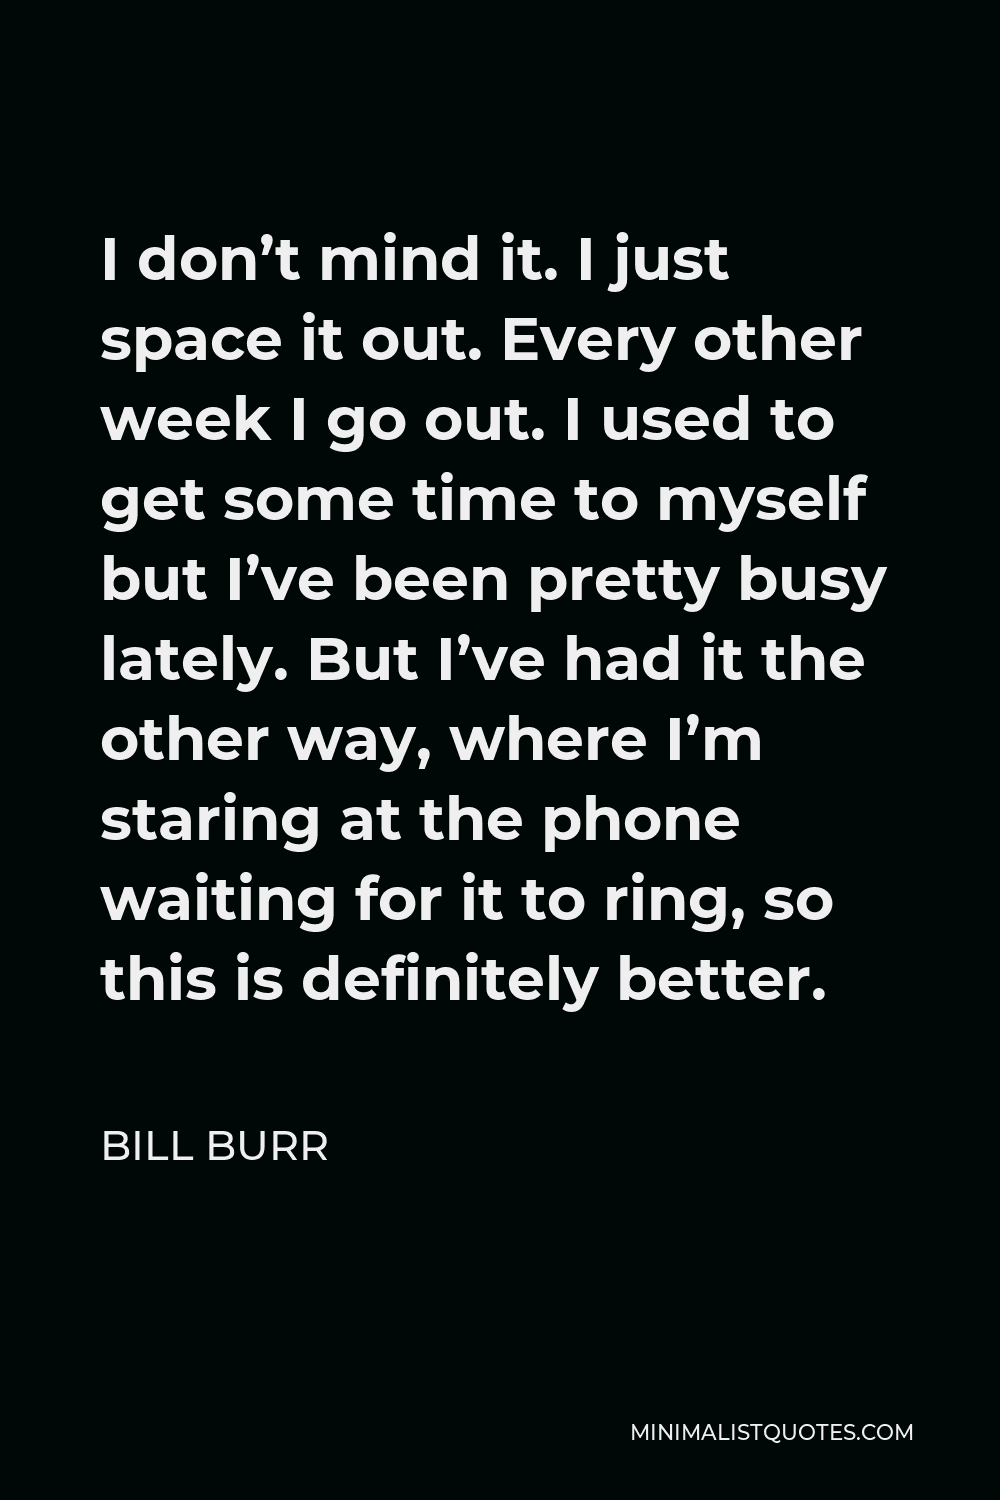 Bill Burr Quote - I don’t mind it. I just space it out. Every other week I go out. I used to get some time to myself but I’ve been pretty busy lately. But I’ve had it the other way, where I’m staring at the phone waiting for it to ring, so this is definitely better.